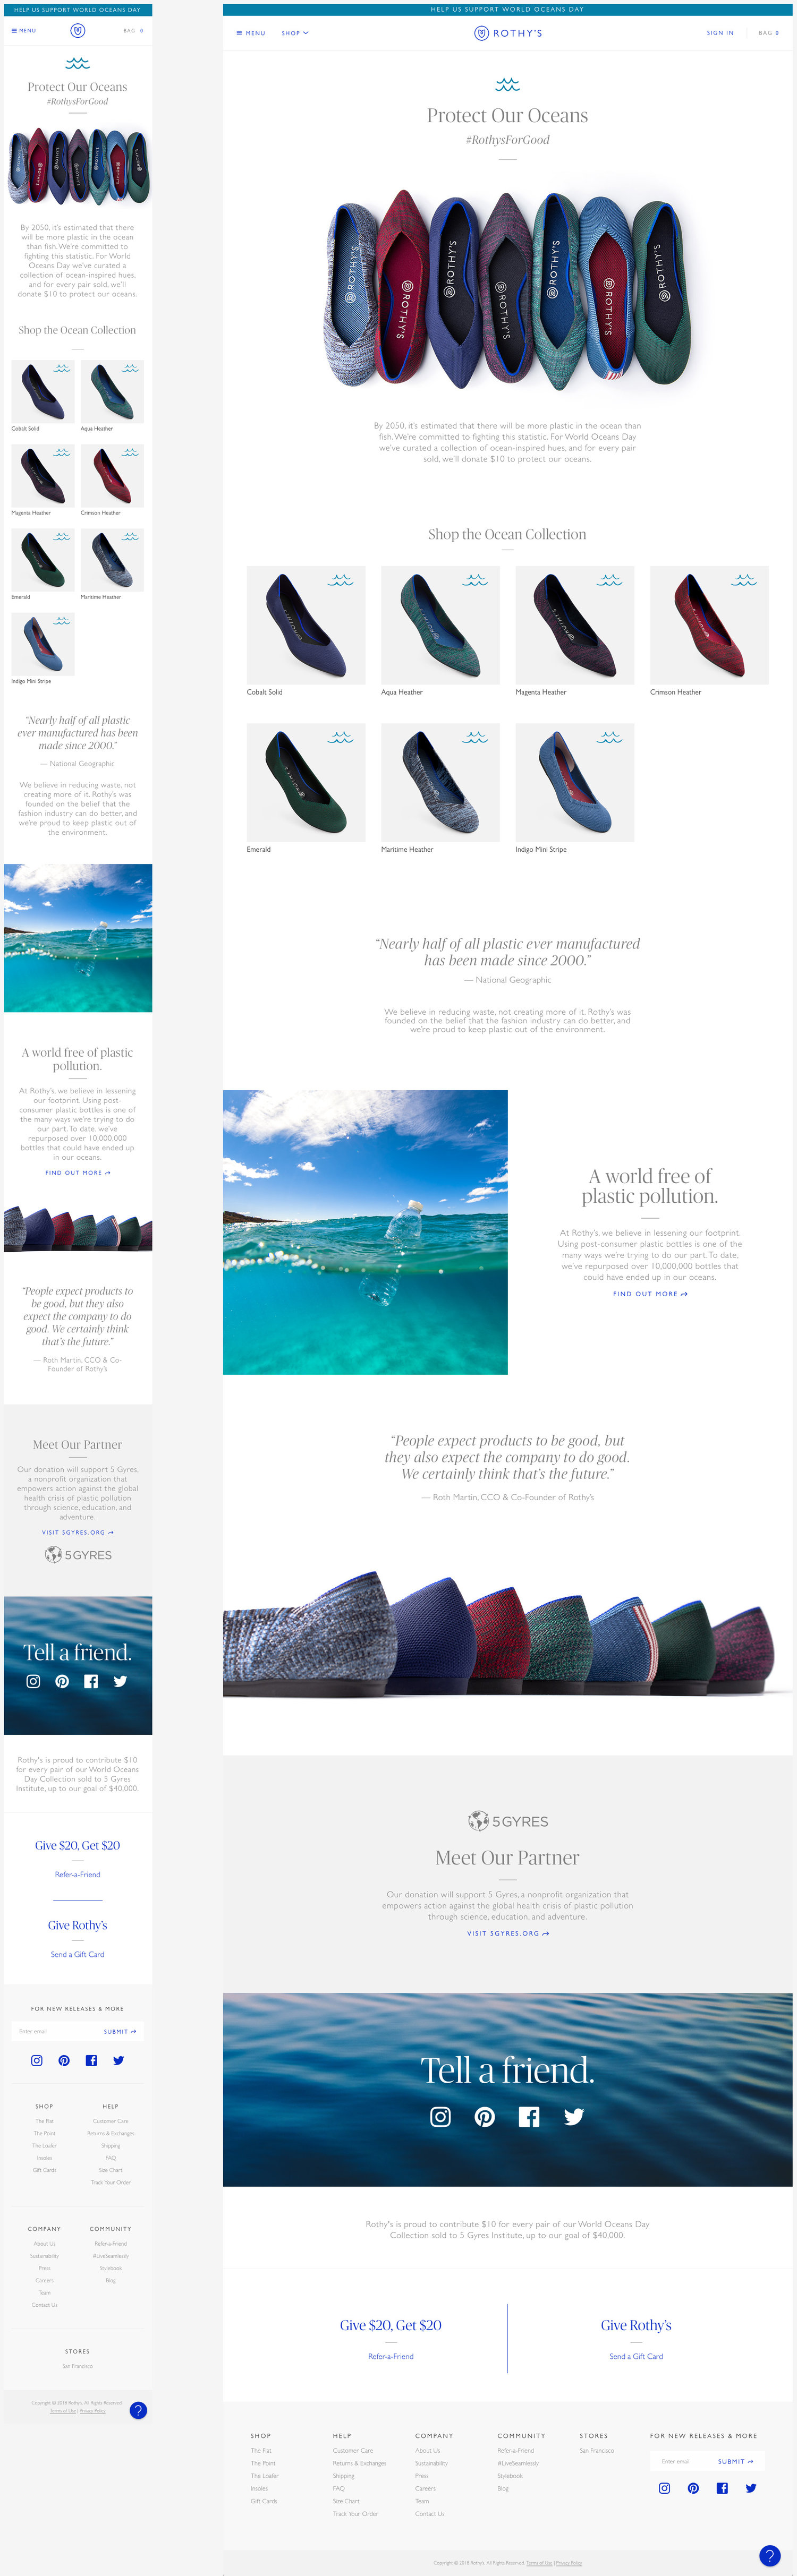 Rothy's World Oceans Day Landing Page